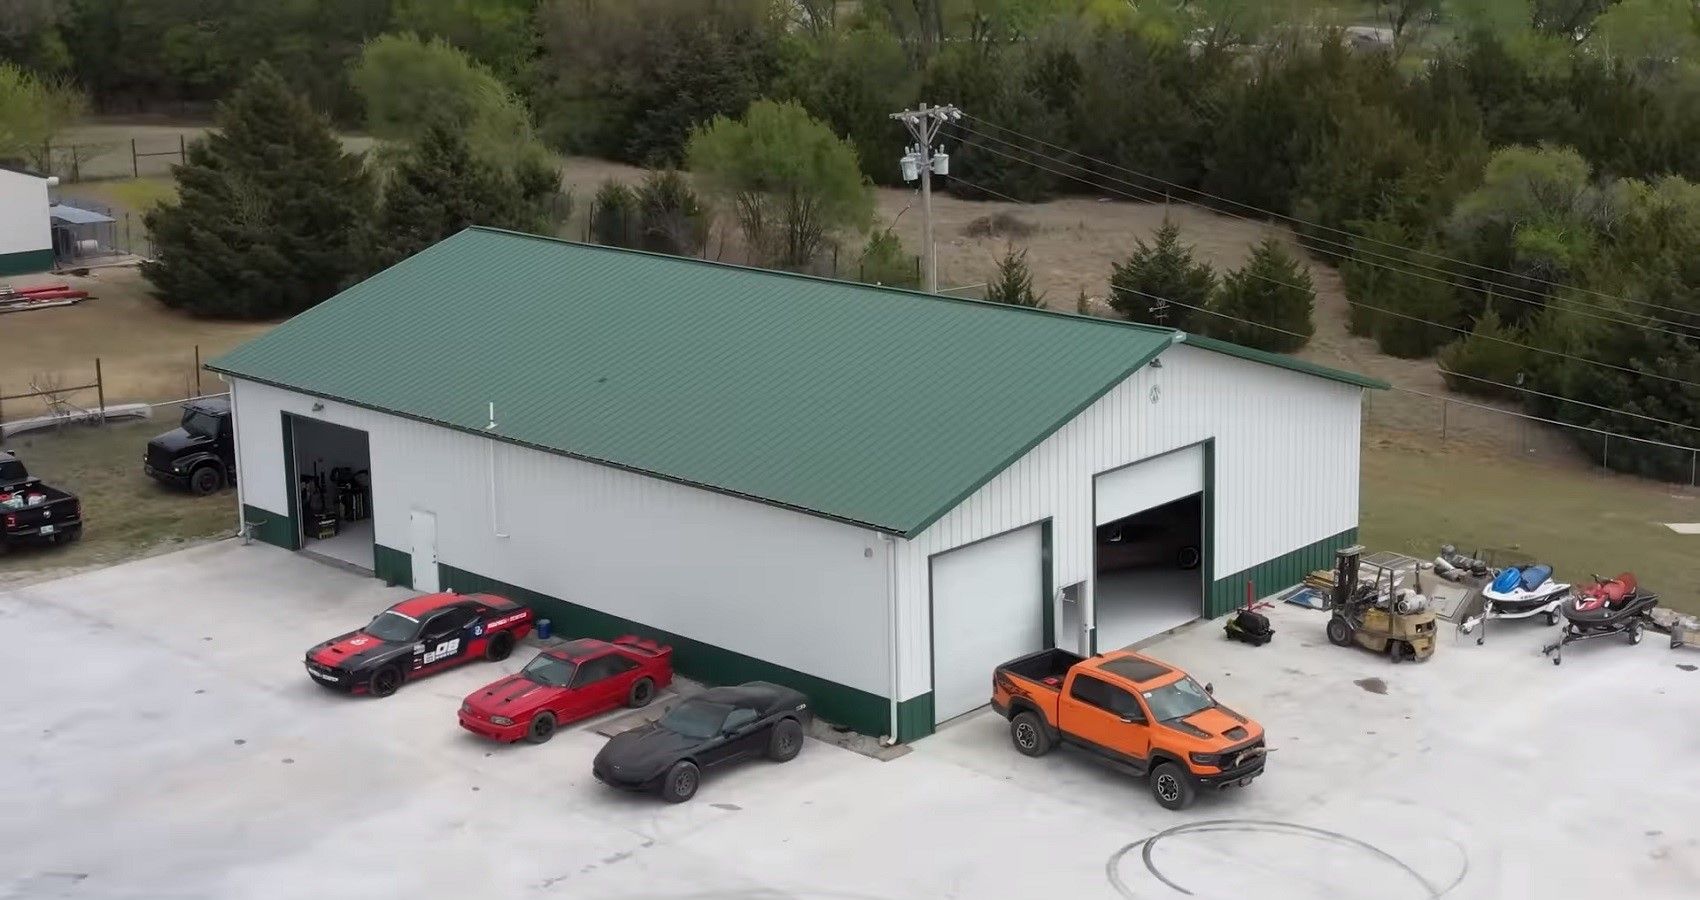 Westen Champlin Upgrades His Garage Into The Horsepower Labs Compound